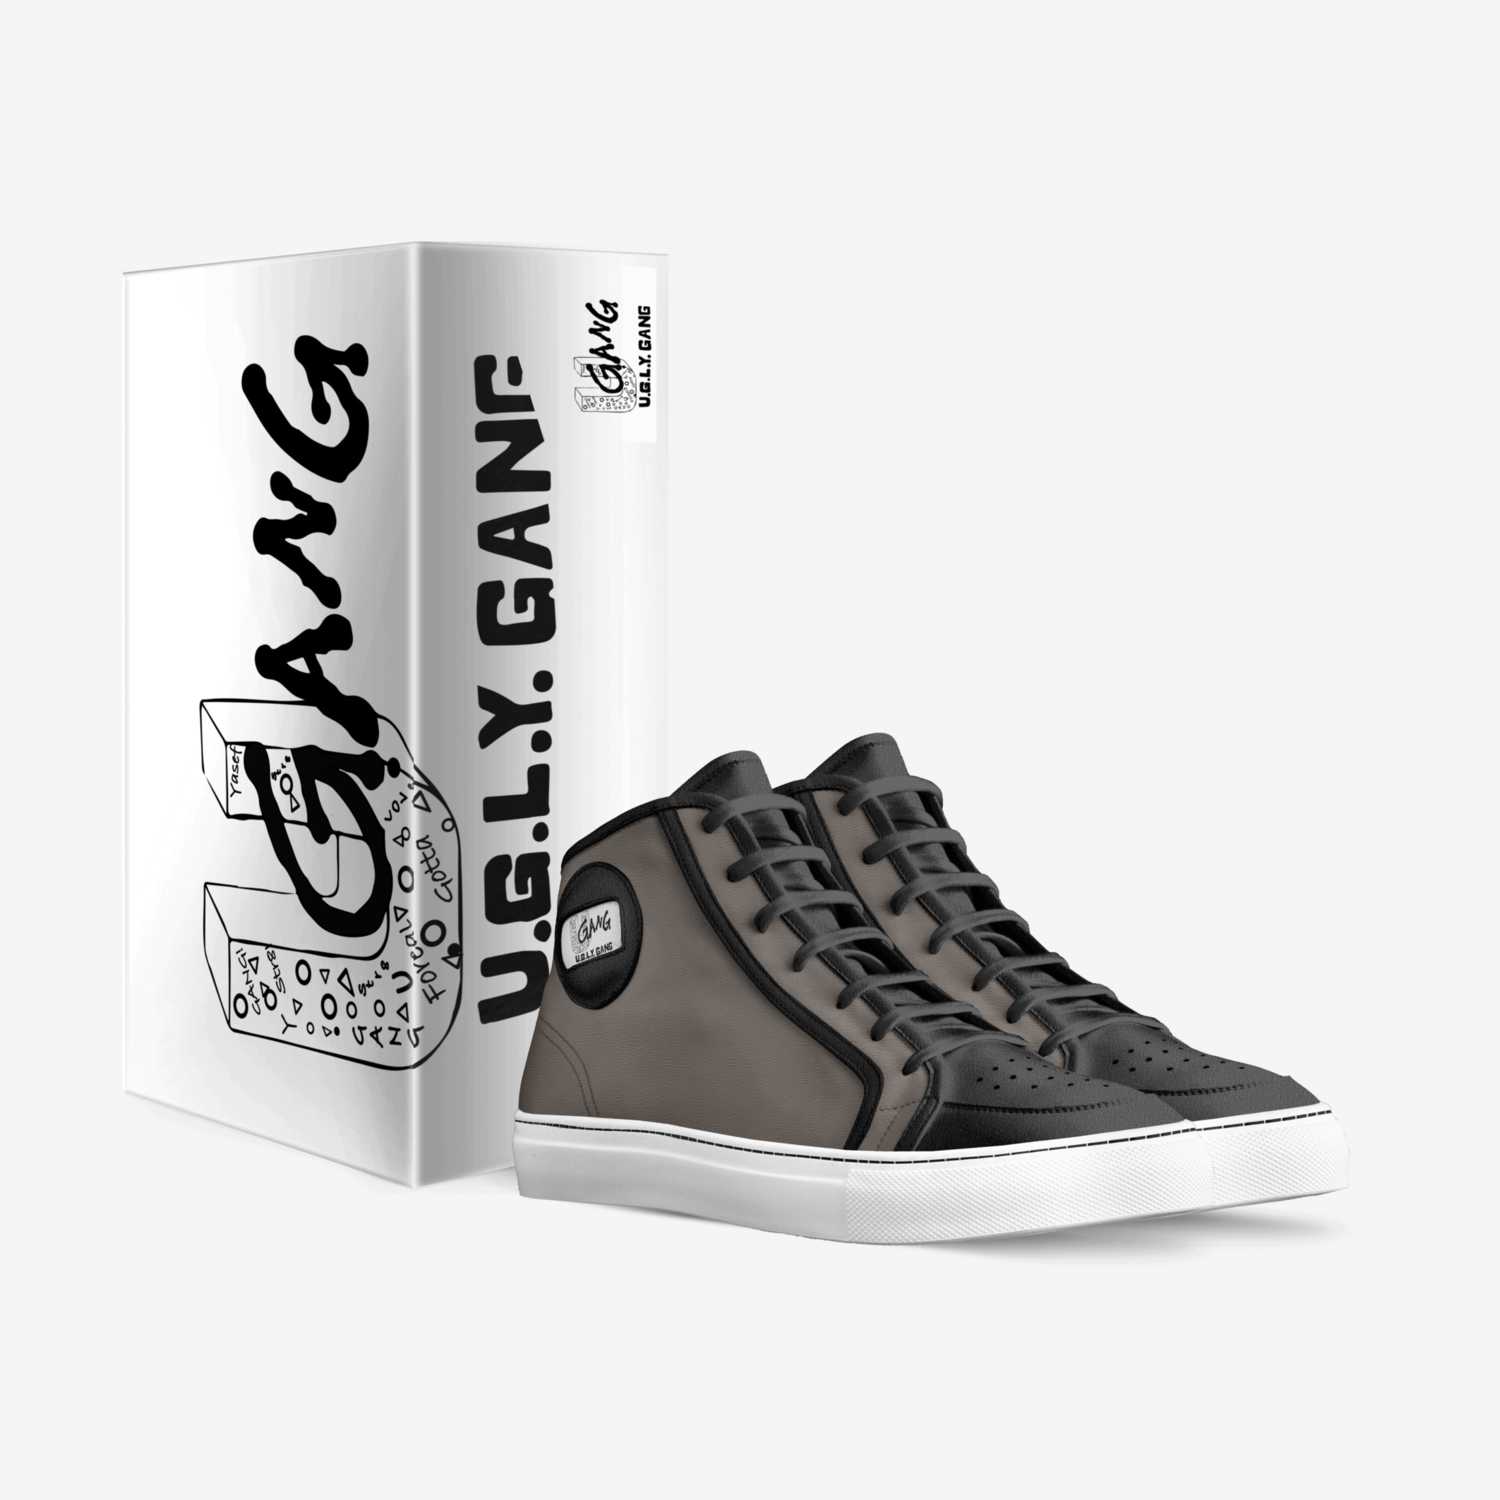 Juice Sippa custom made in Italy shoes by Kev Bleu | Box view